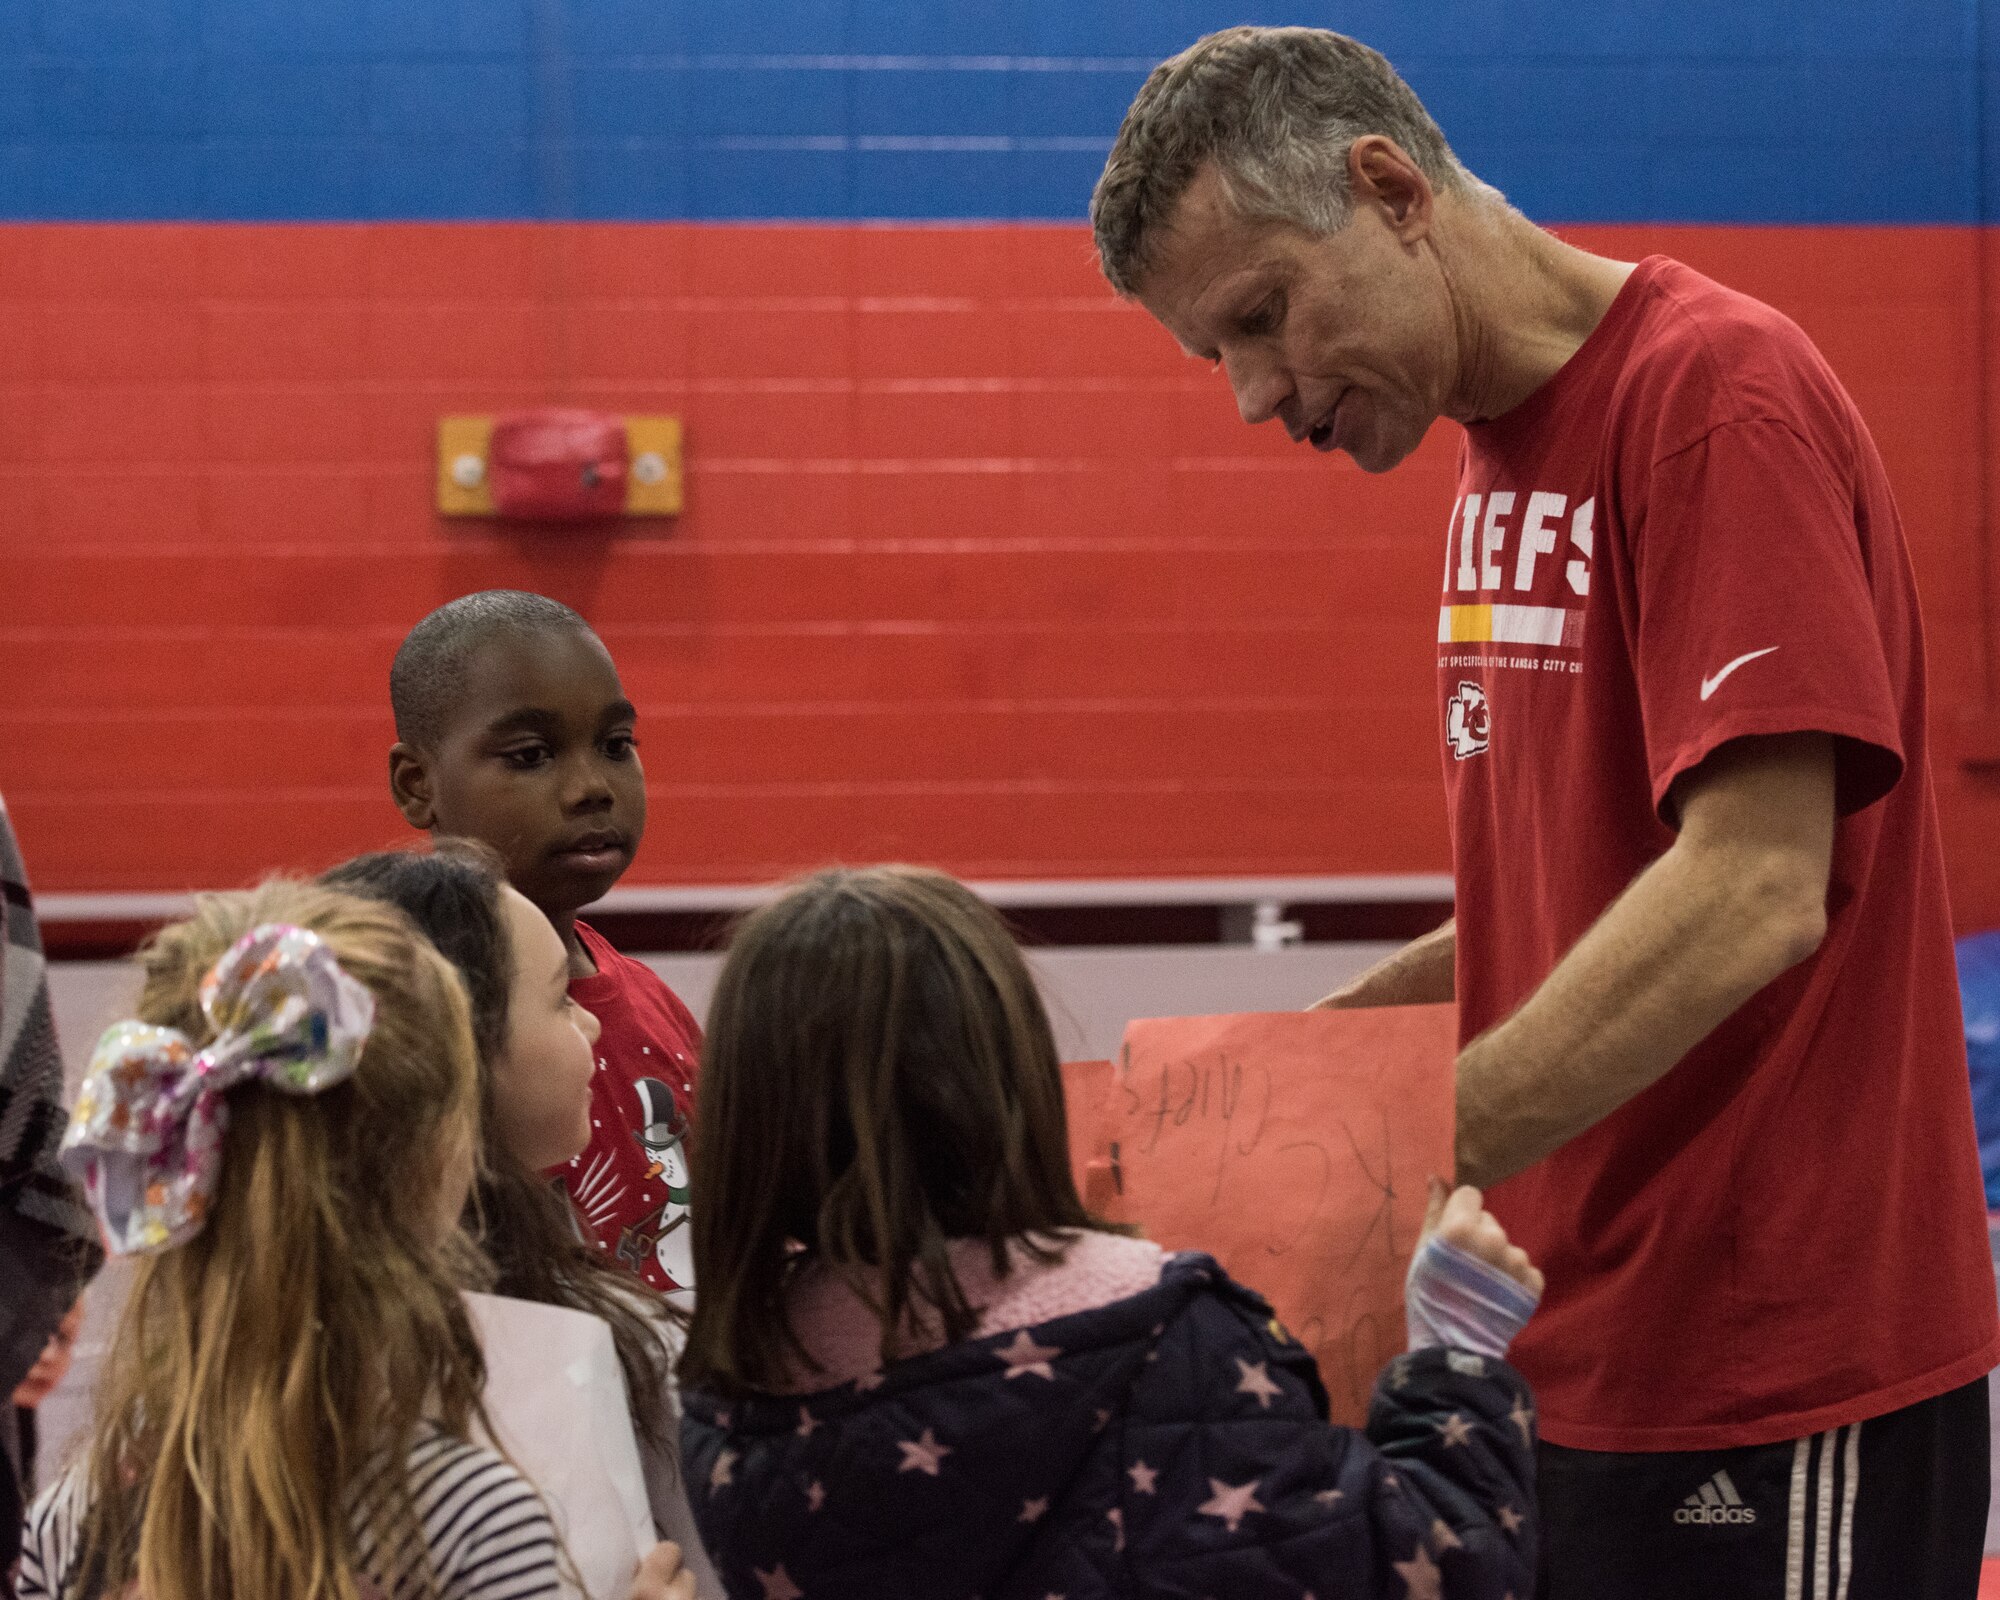 Dan Meers, the Kansas City Chiefs NFL team mascot KC Wolf, receives pictures made by the children at the Youth Center, Whiteman Air Force Base, Missouri, Dec. 18, 2019. Meers talked to the children about the importance of your attitude, behavior and character and answered questions about what life is like as a mascot as part of an outreach to positively influence their overall well-being and promote resiliency. (U.S. Air Force photo by Airman 1st Class Christina Carter)